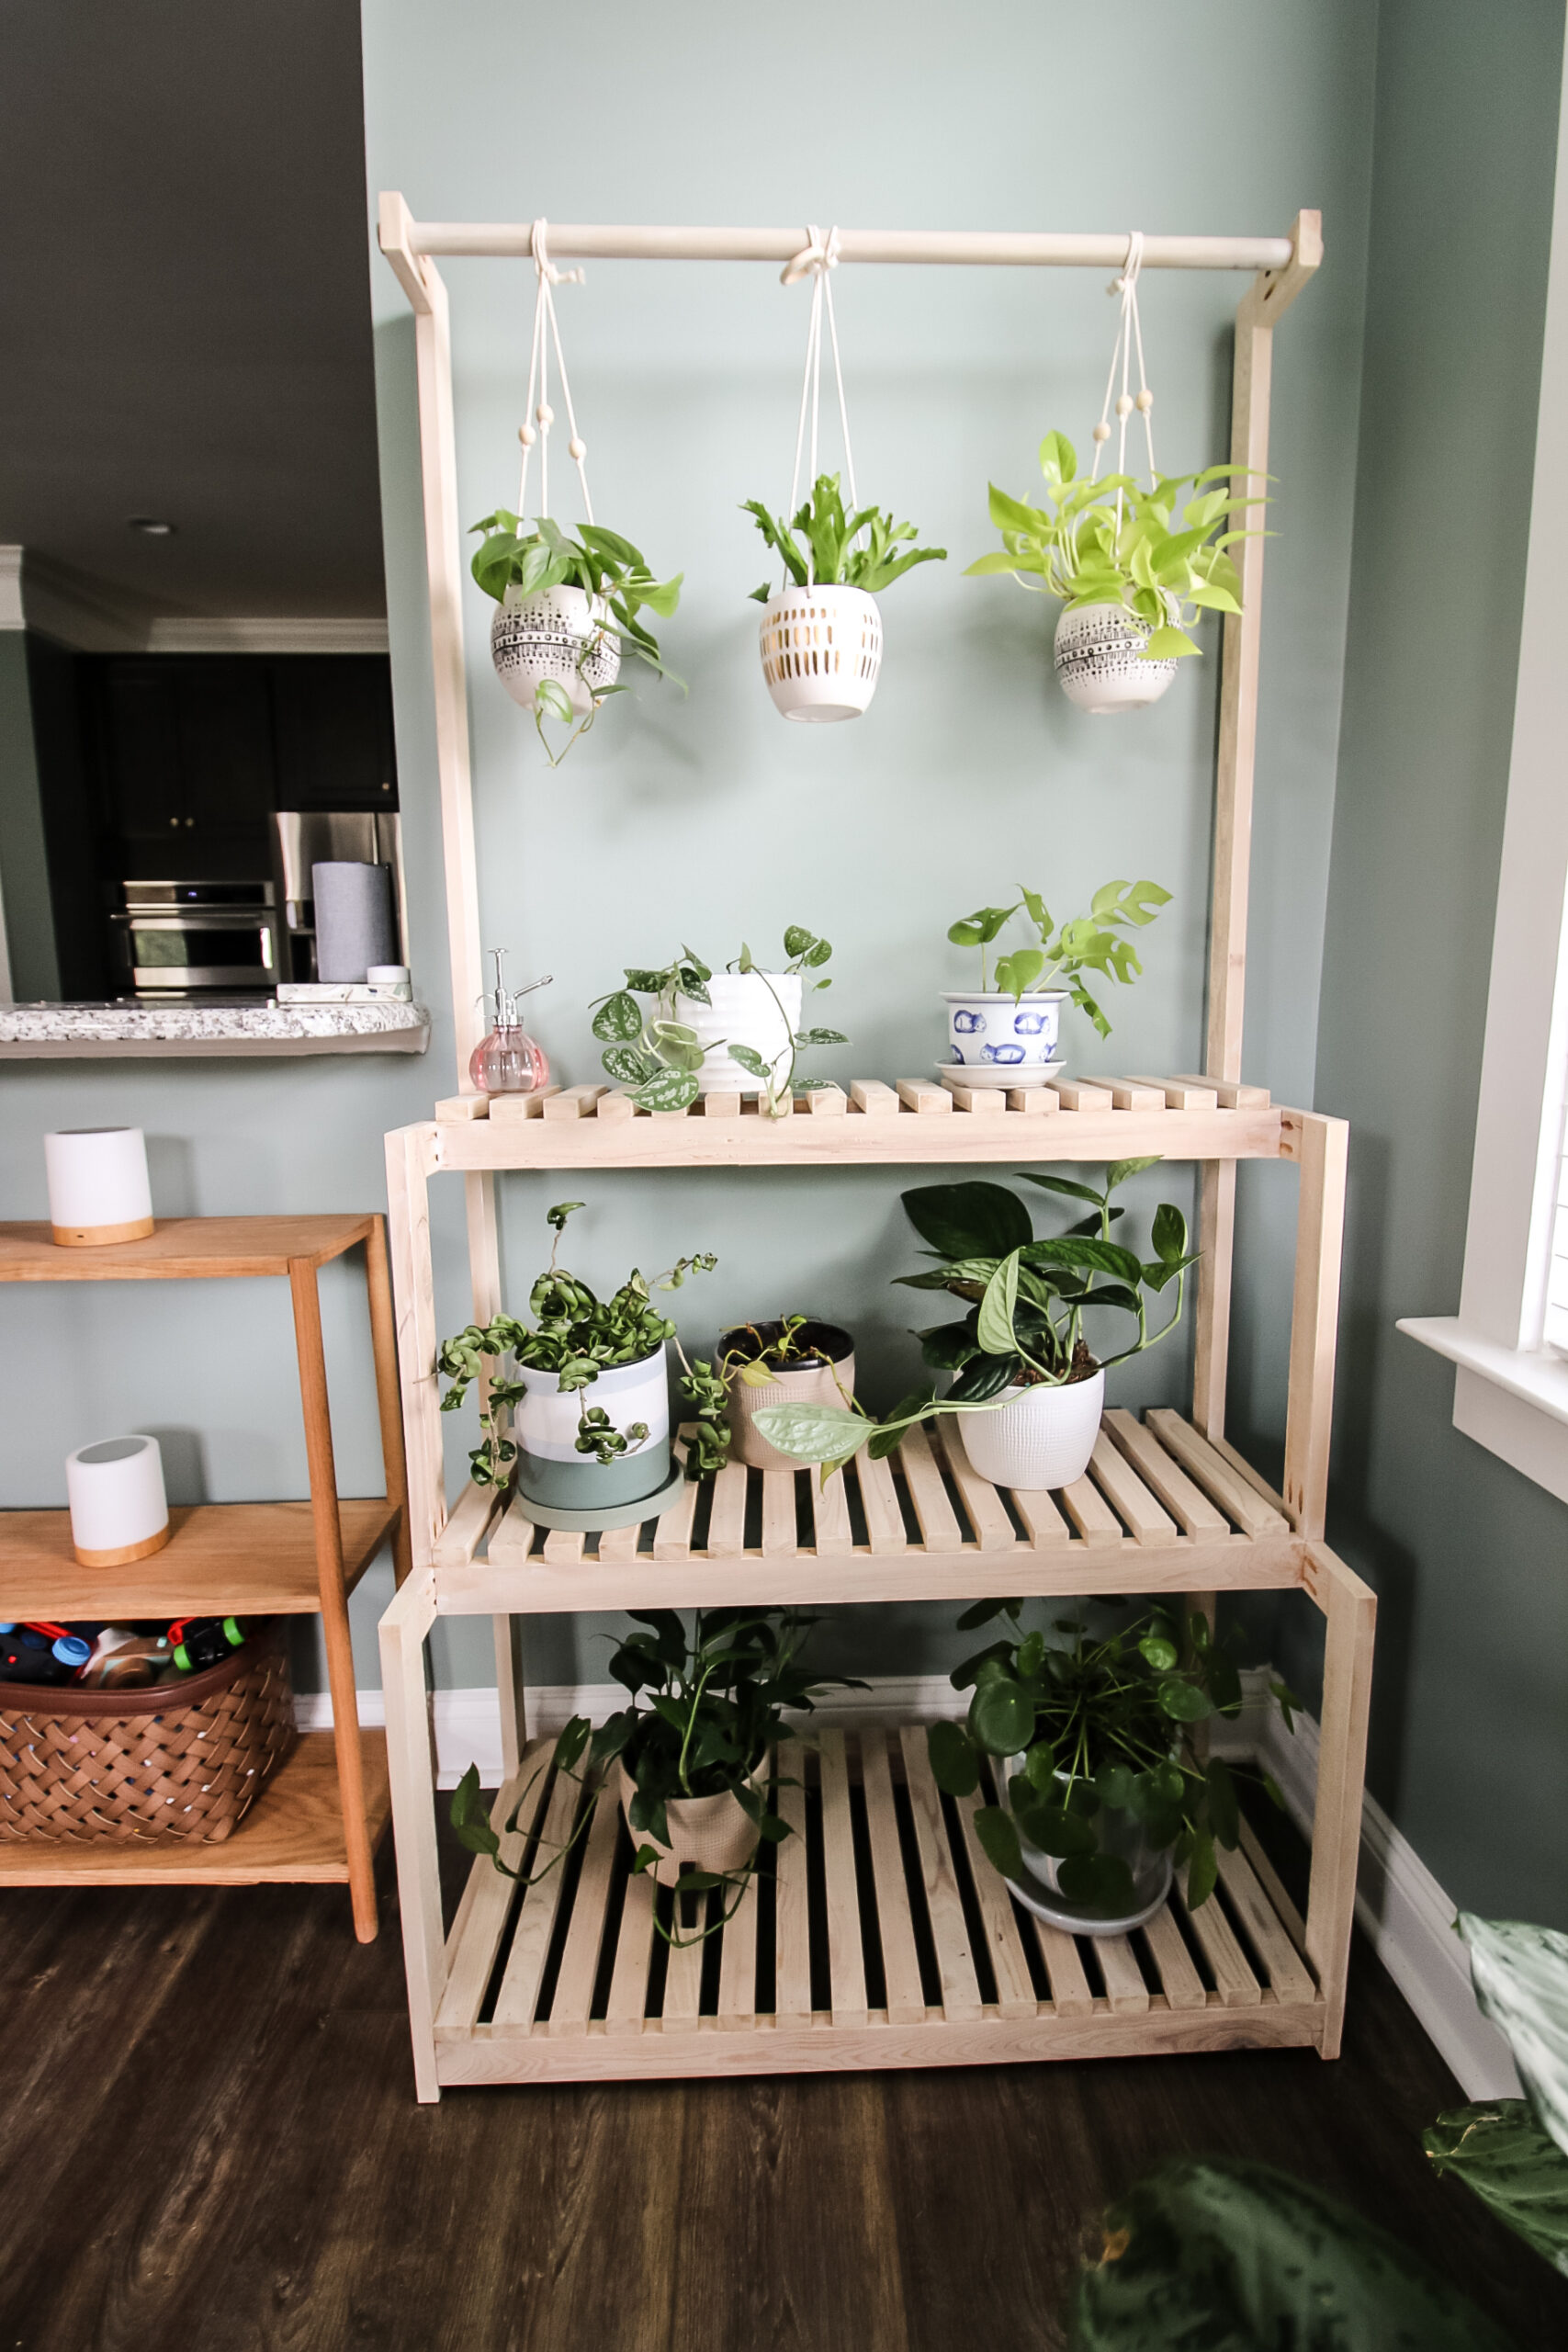 How to build a DIY plant stand with hanging bar